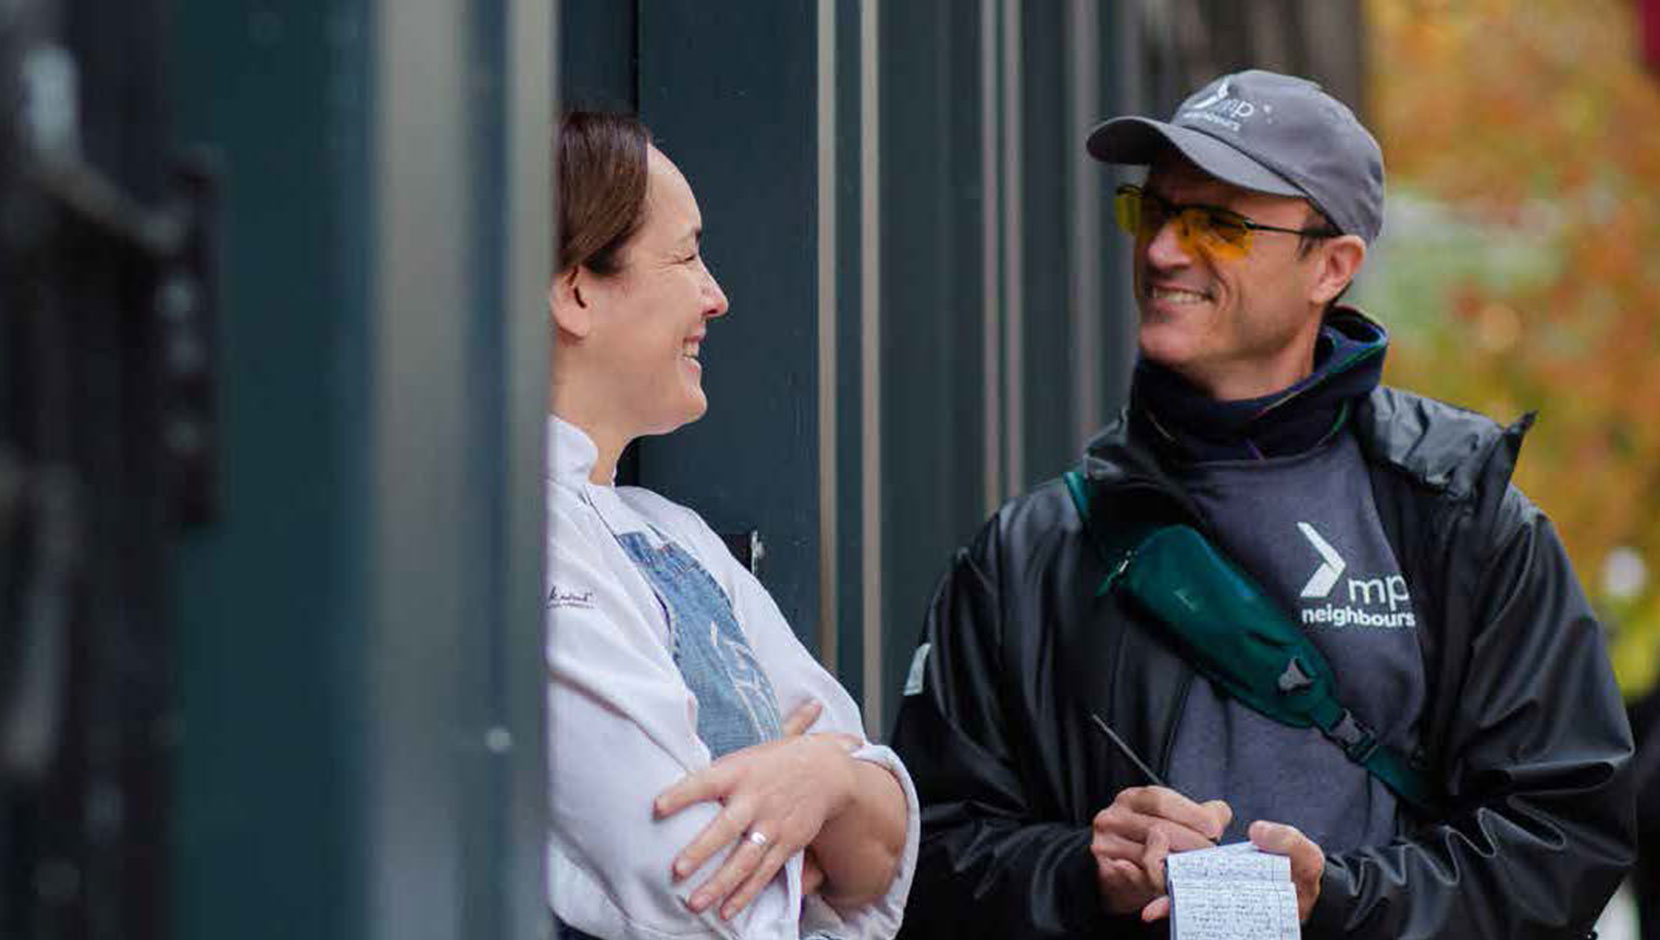 Two employees stand outside. One is wearing a blue apron, the other is wearing a Mission Possible jacket and carrying a note pad.